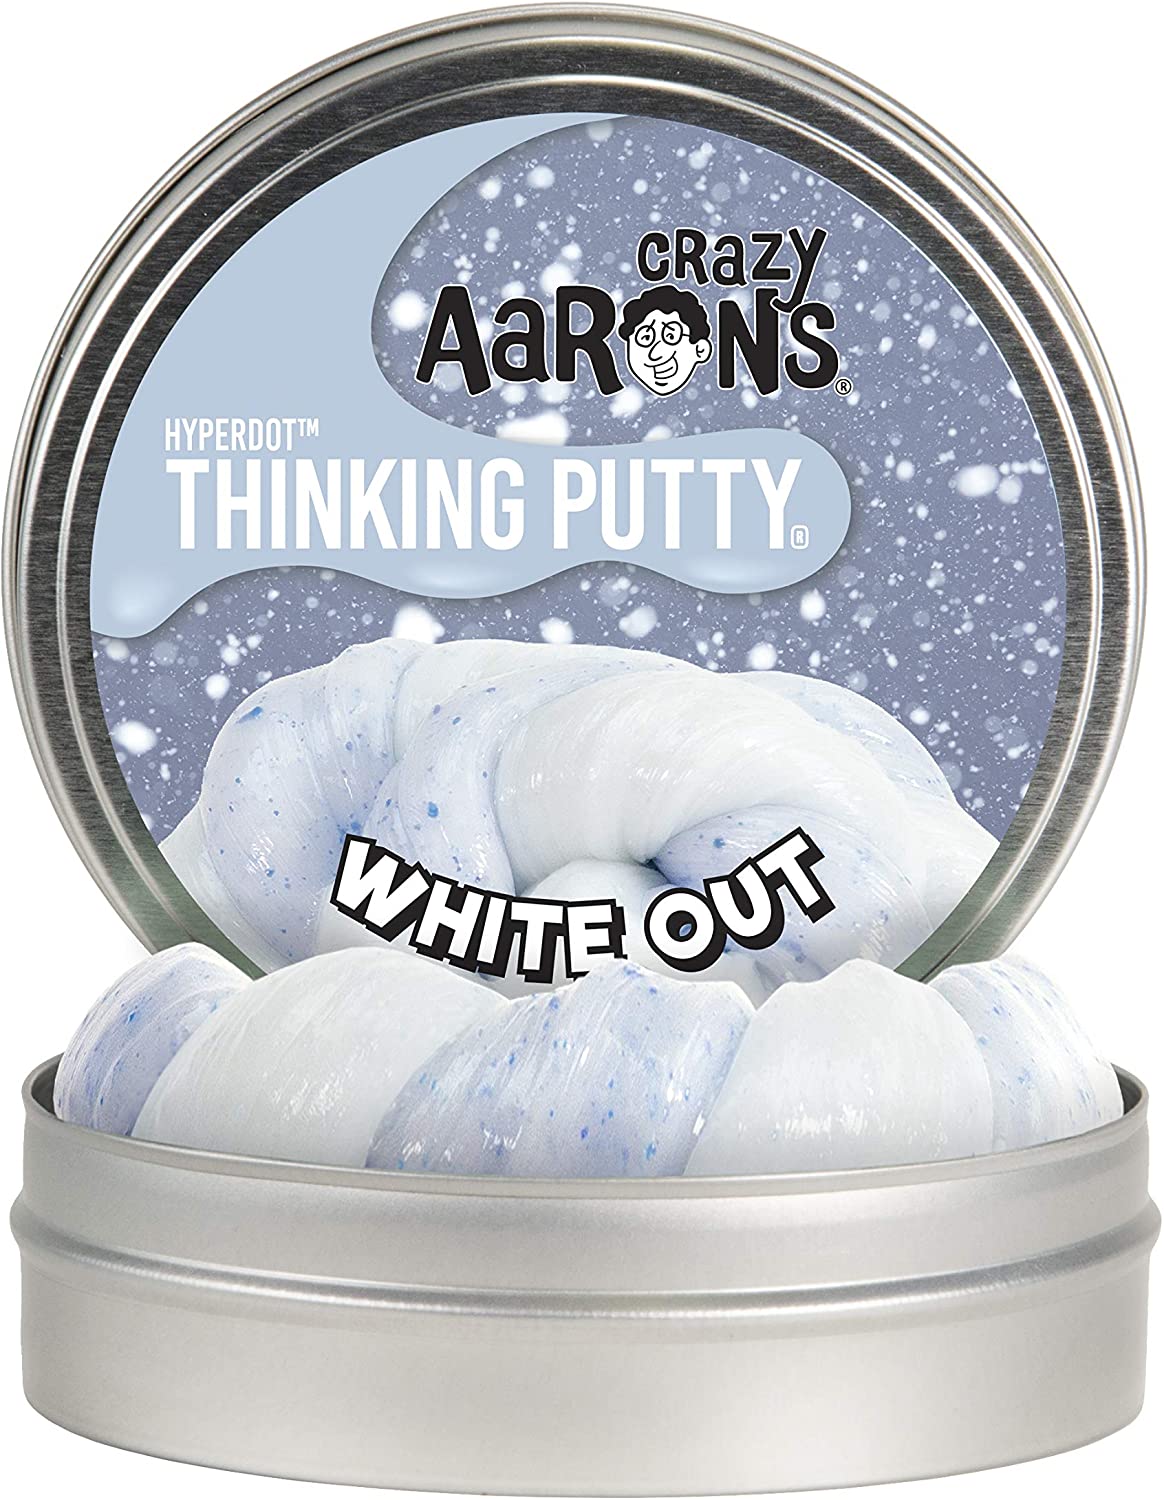 4" White Out Thinking Putty